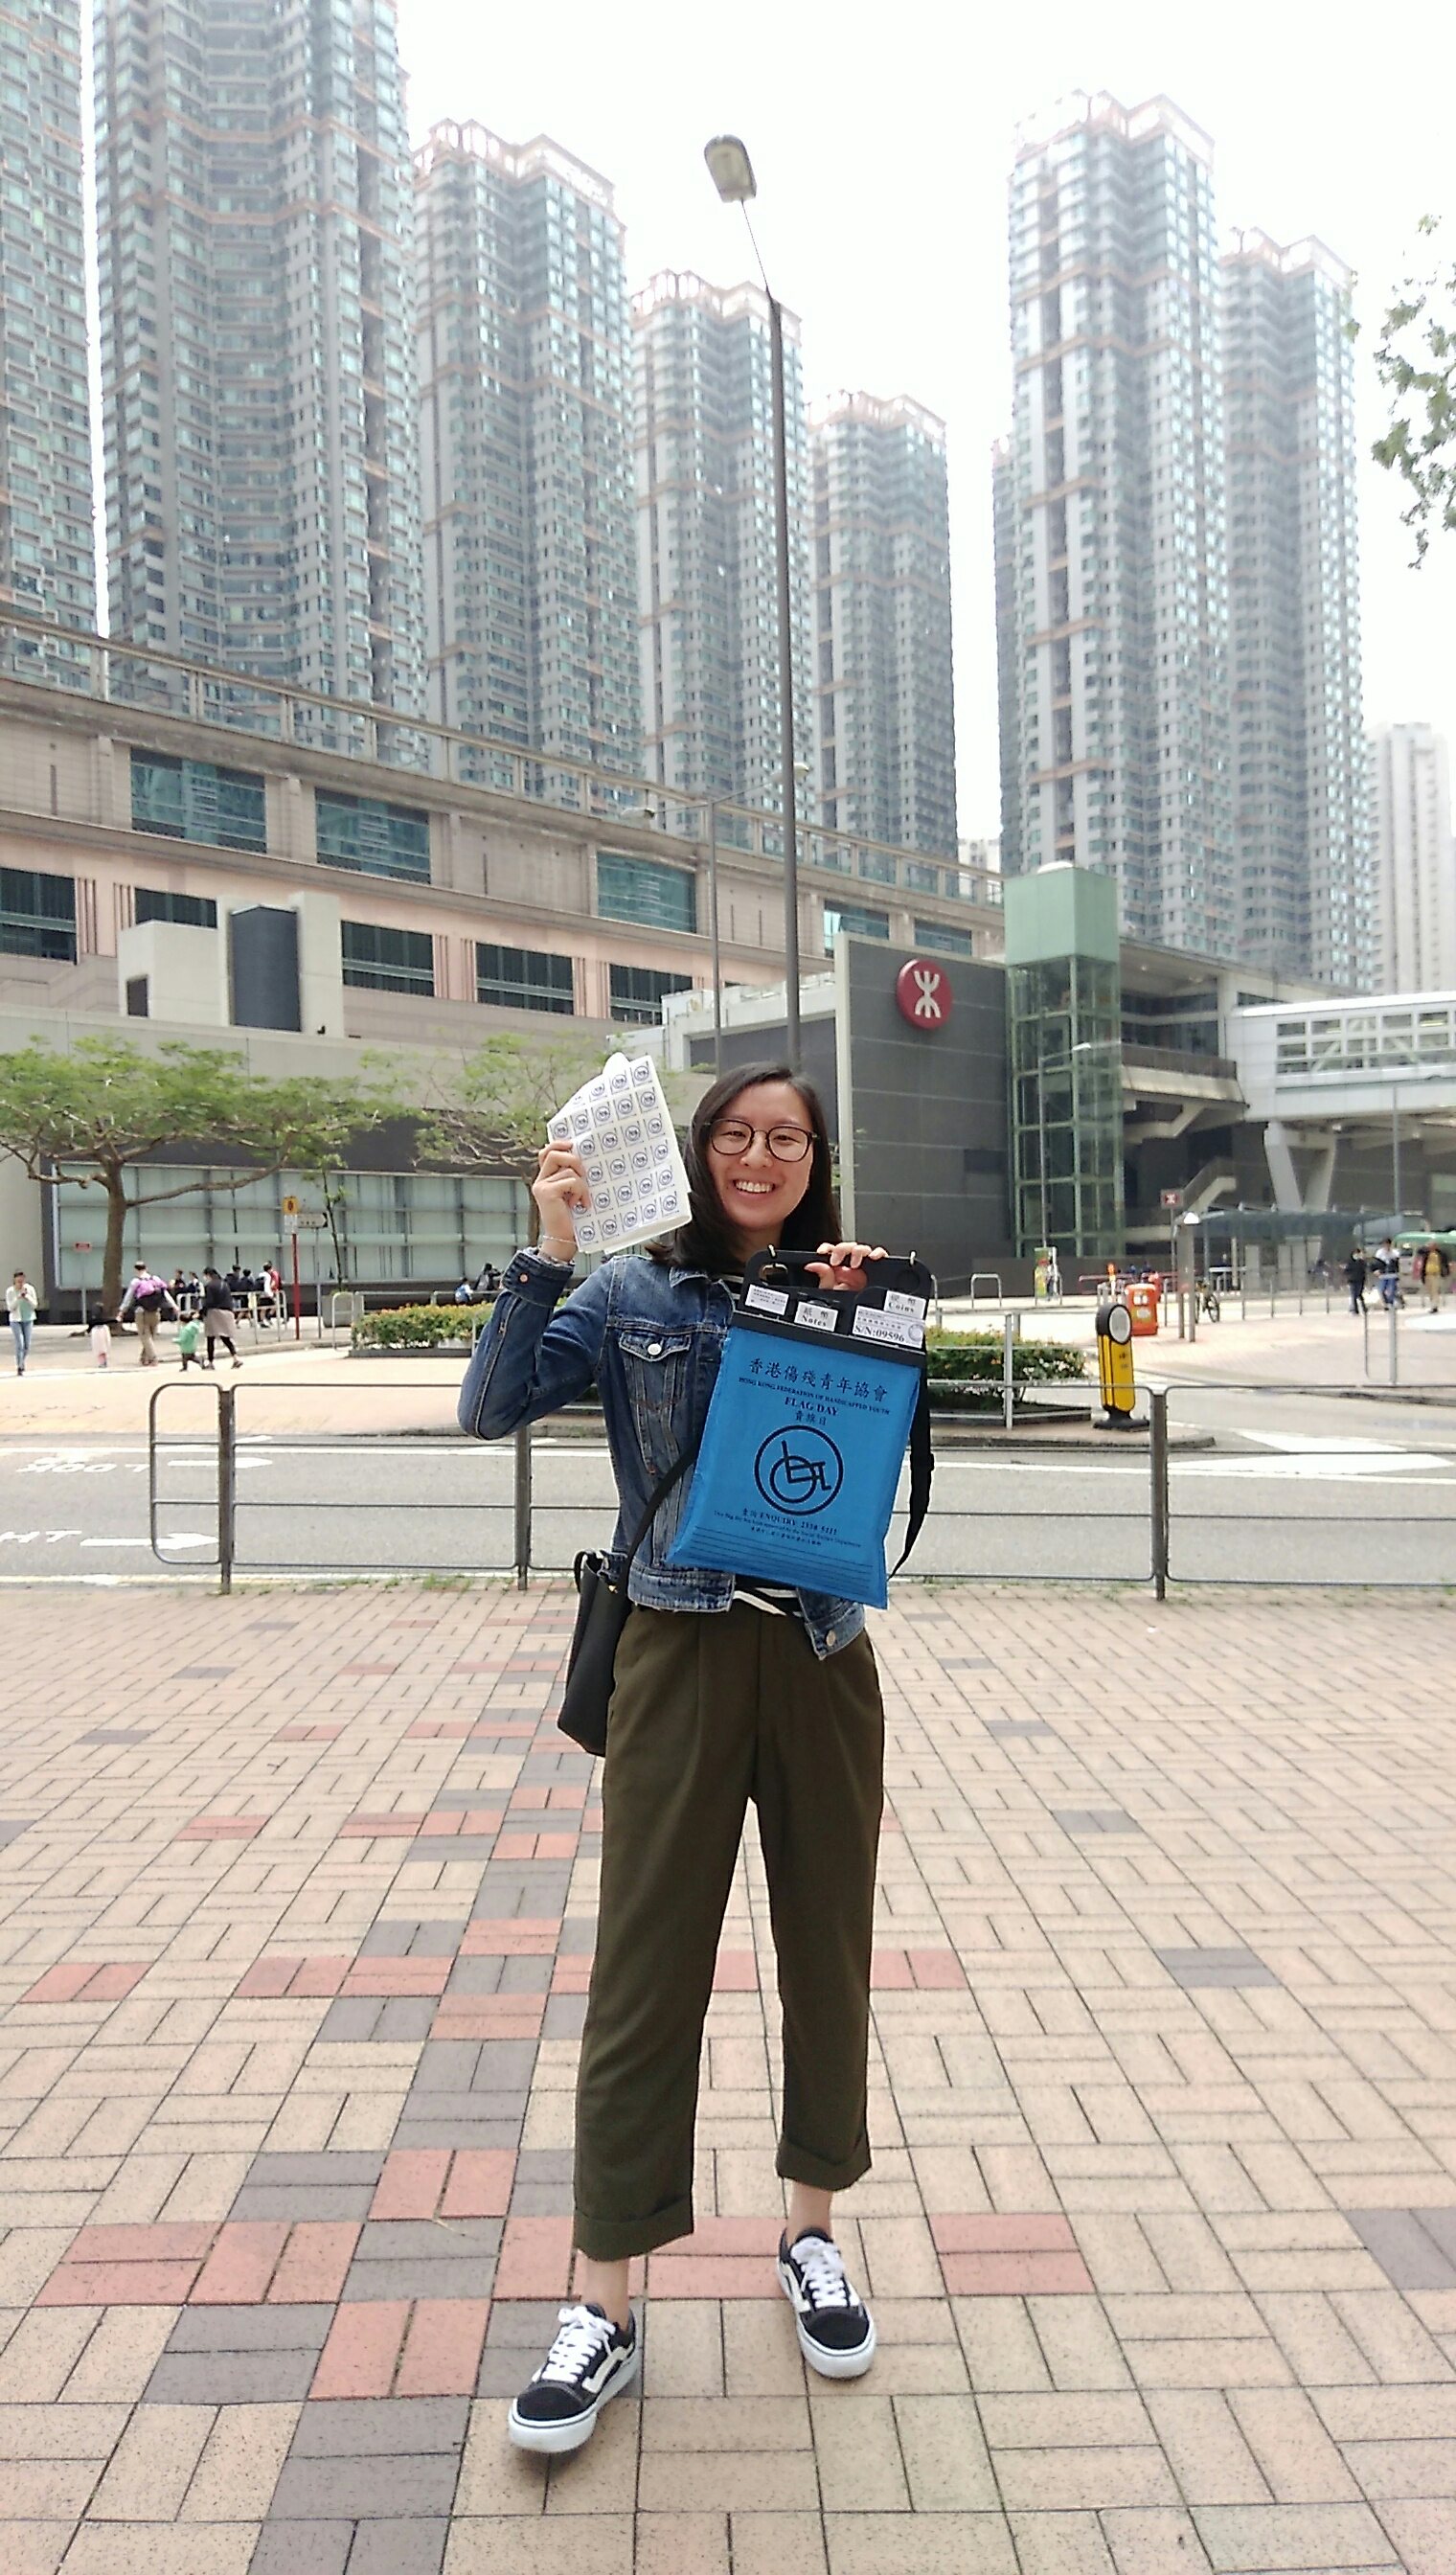 HK Federation of Handicapped Youth-Flag Selling day 14/3/2018